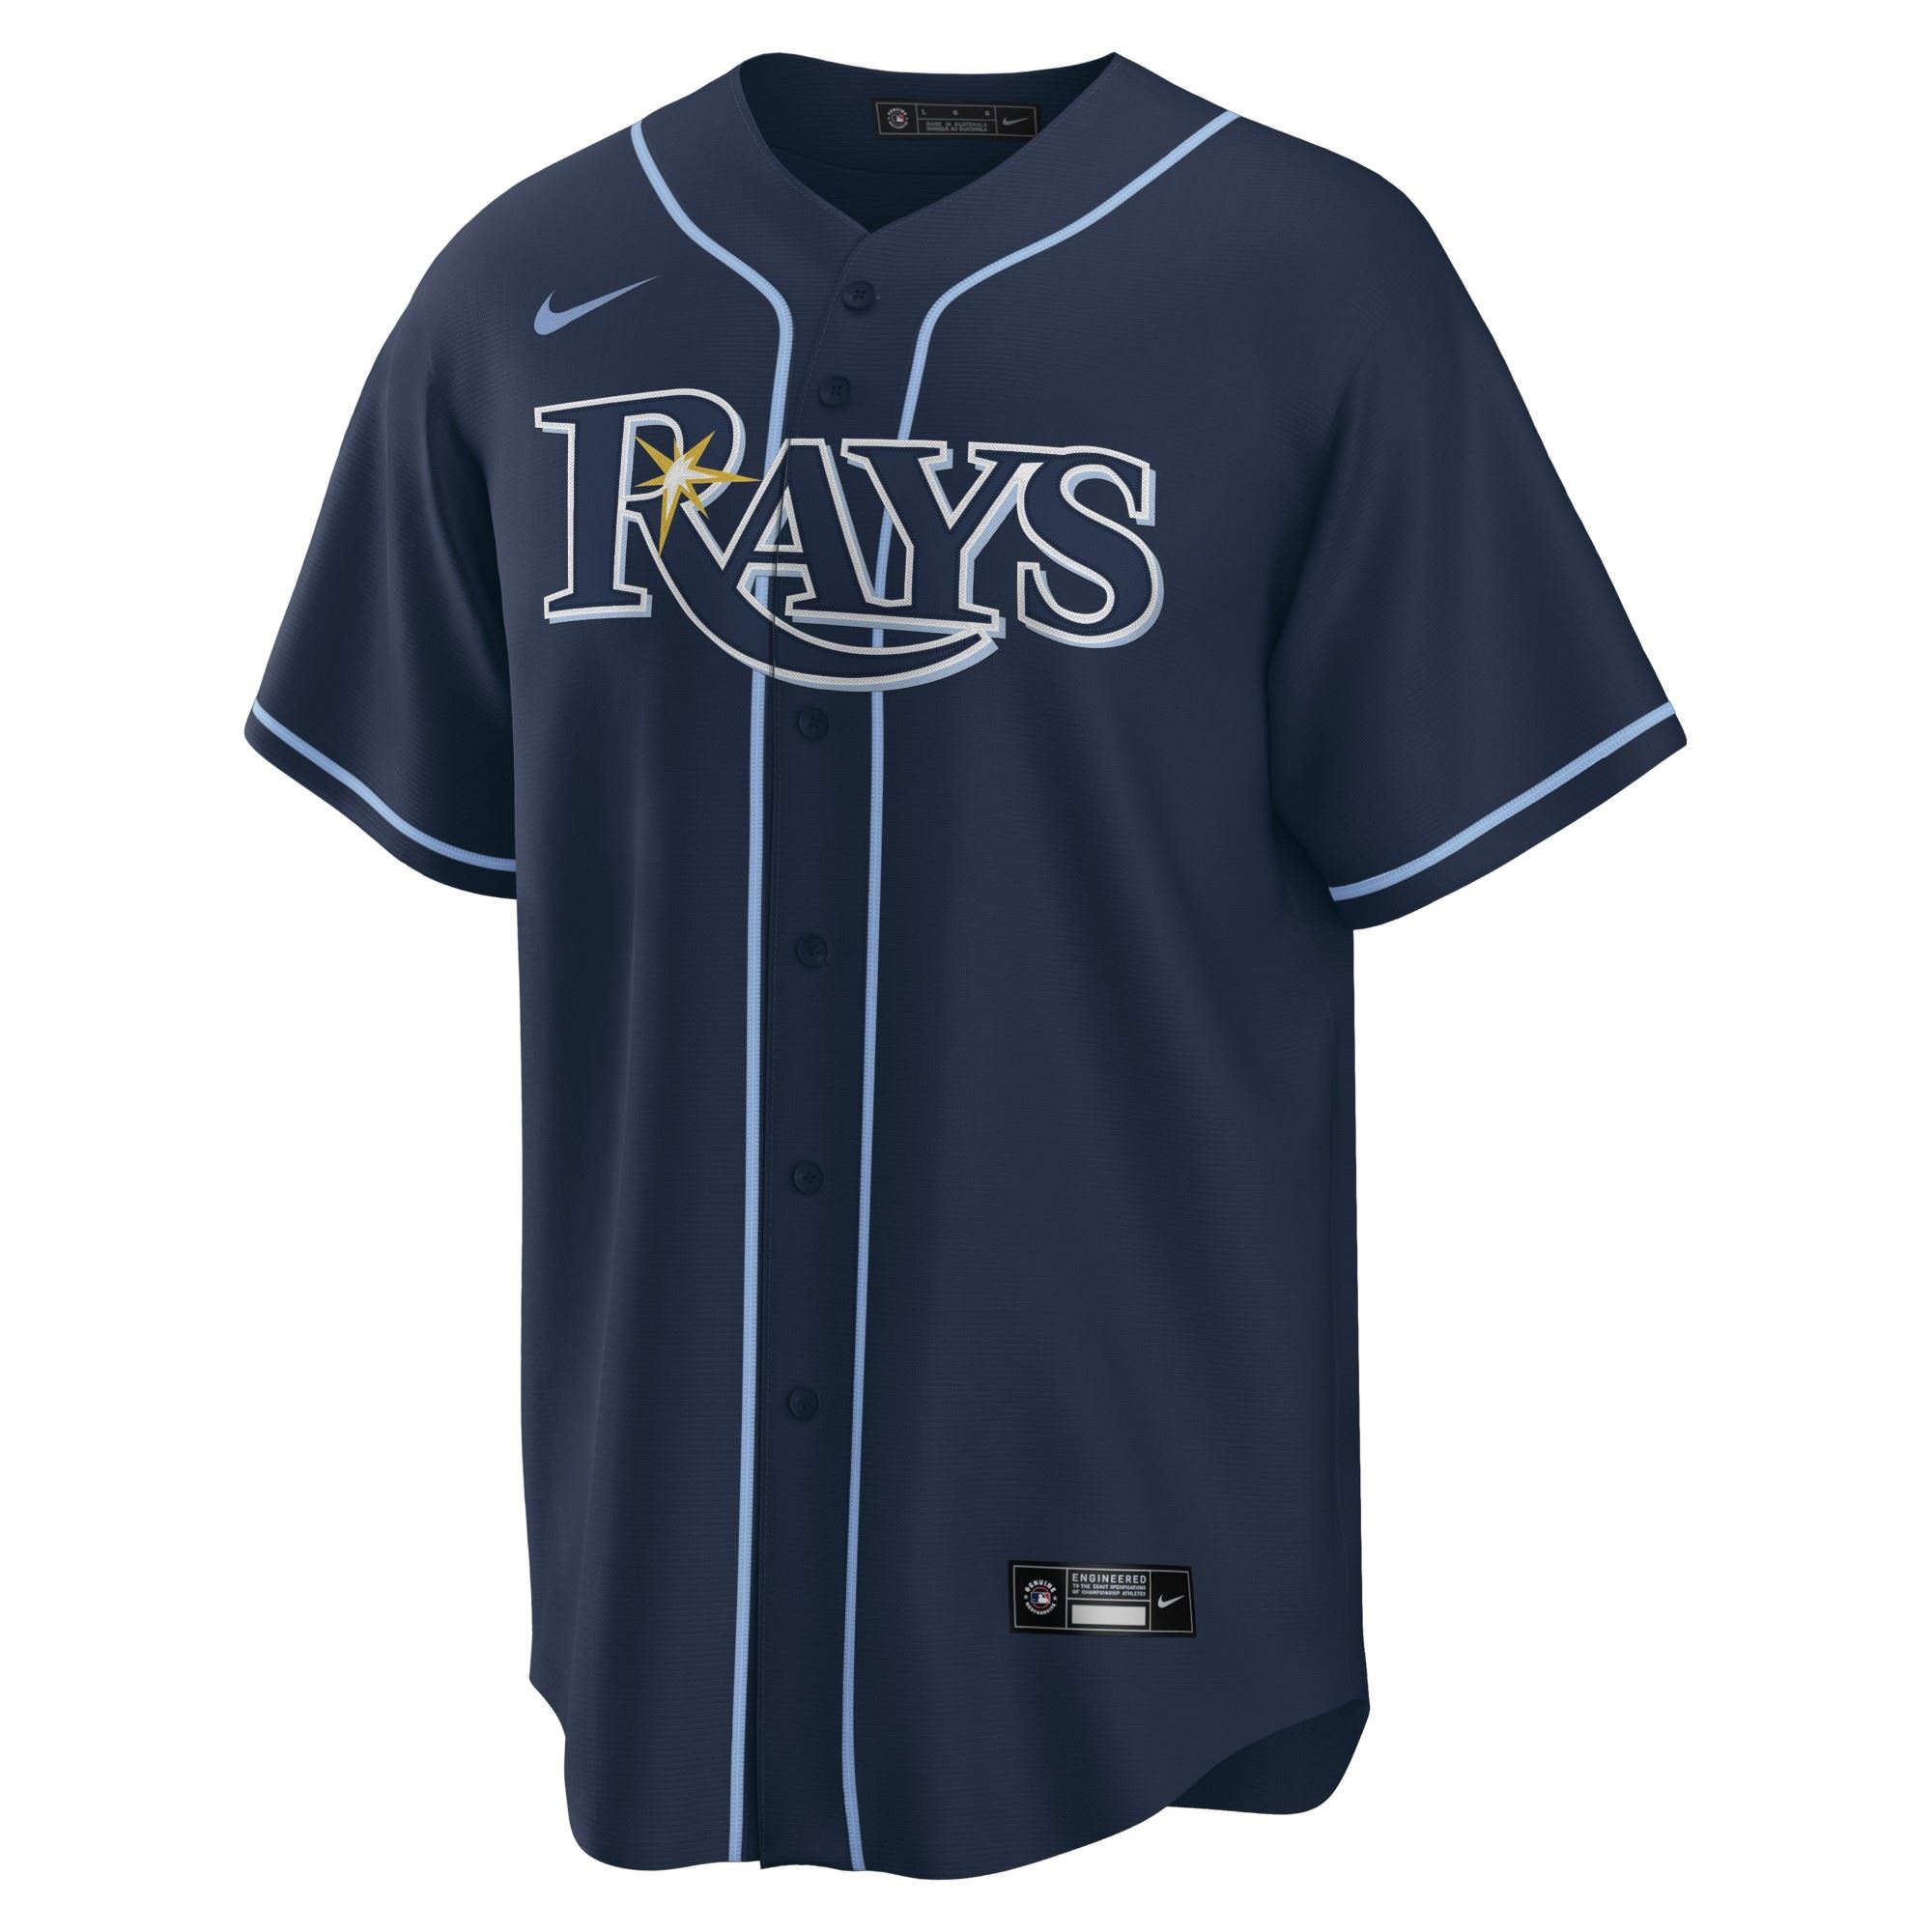 Tampa Bay Rays Blue Official MLB Replica Alternate Jersey Nike